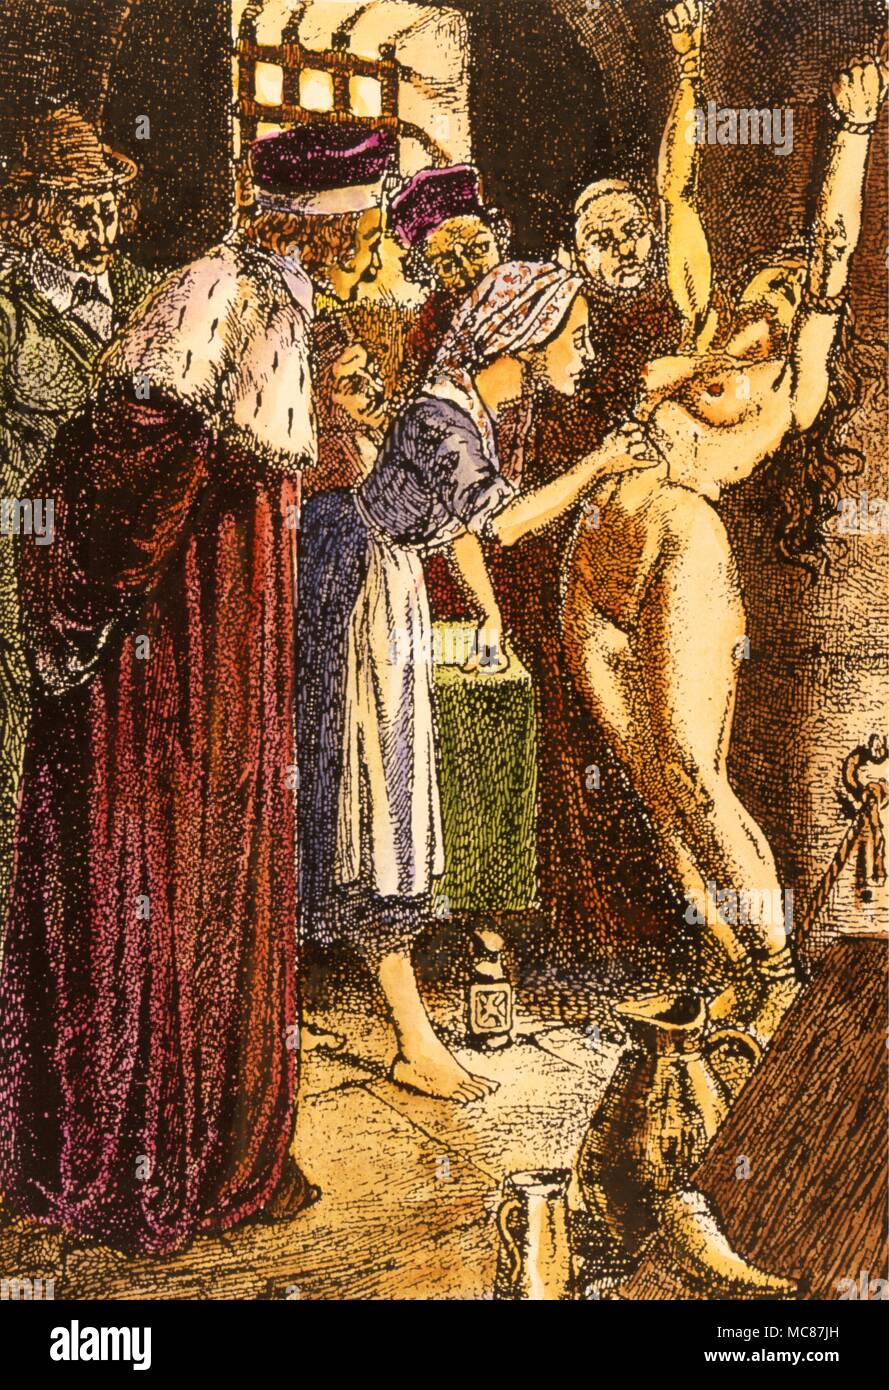 Nineteenth century drawing of a chained witch suspect being pricked to see if she is a witch. From a 'Book of Shadows.' Stock Photo